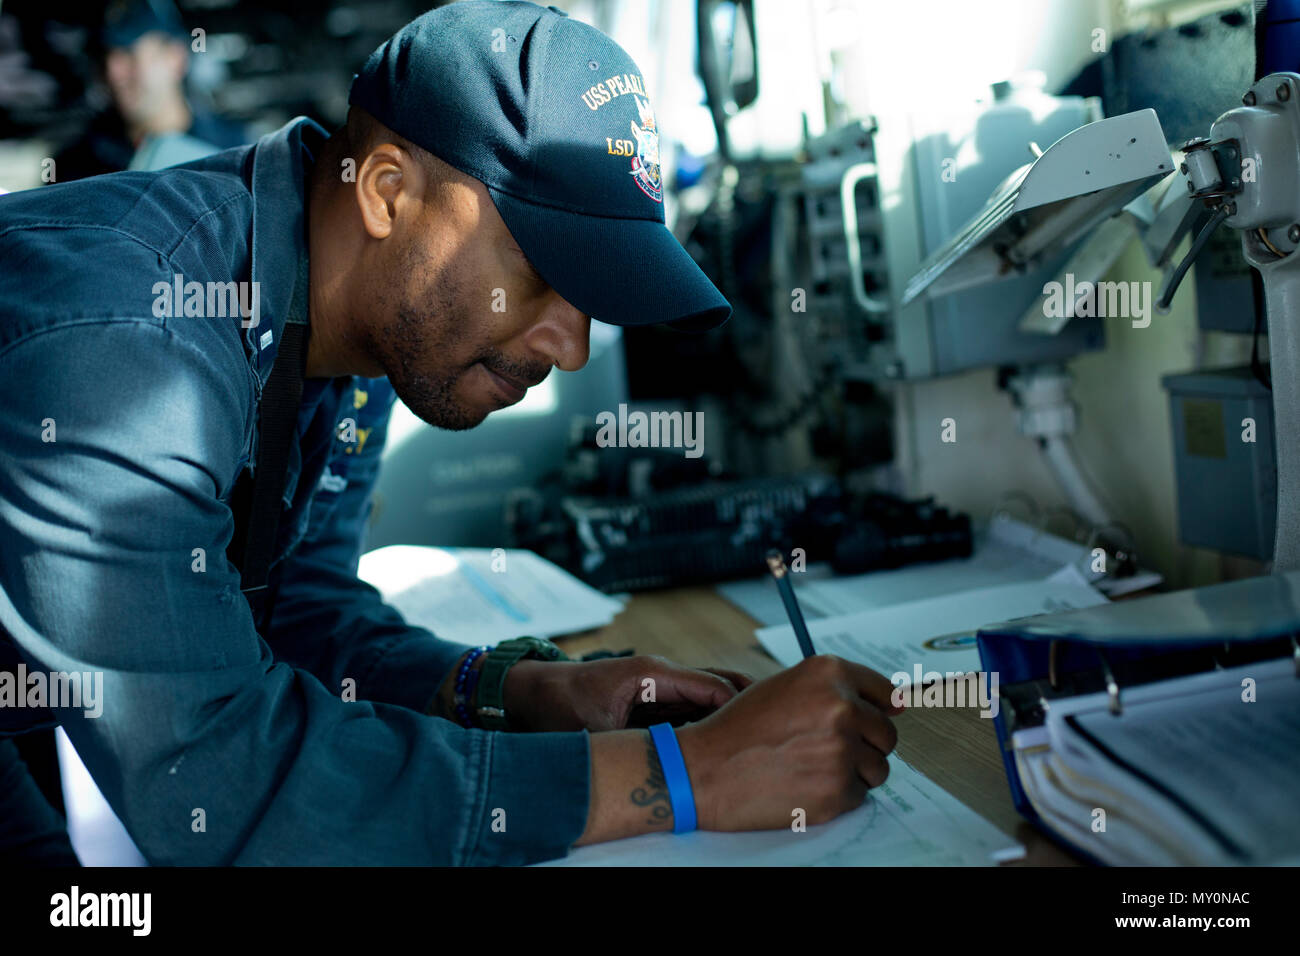 U.S. Navy Lt. j.g. Azariah D. Lishey, the officer of the deck with Auxiliary Division, Engineering Department, USS Pearl Harbor (LSD-52), writes on a perimeter sheet aboard the Pearl Harbor, Dec. 7, 2016, in the Pacific Ocean. Lishey used the perimeter sheet to determine the distance between the Pearl Harbor to another identified vessel. (U.S. Marine Corps photo by Lance Cpl. Erick J. ClarosVillalta) Stock Photo